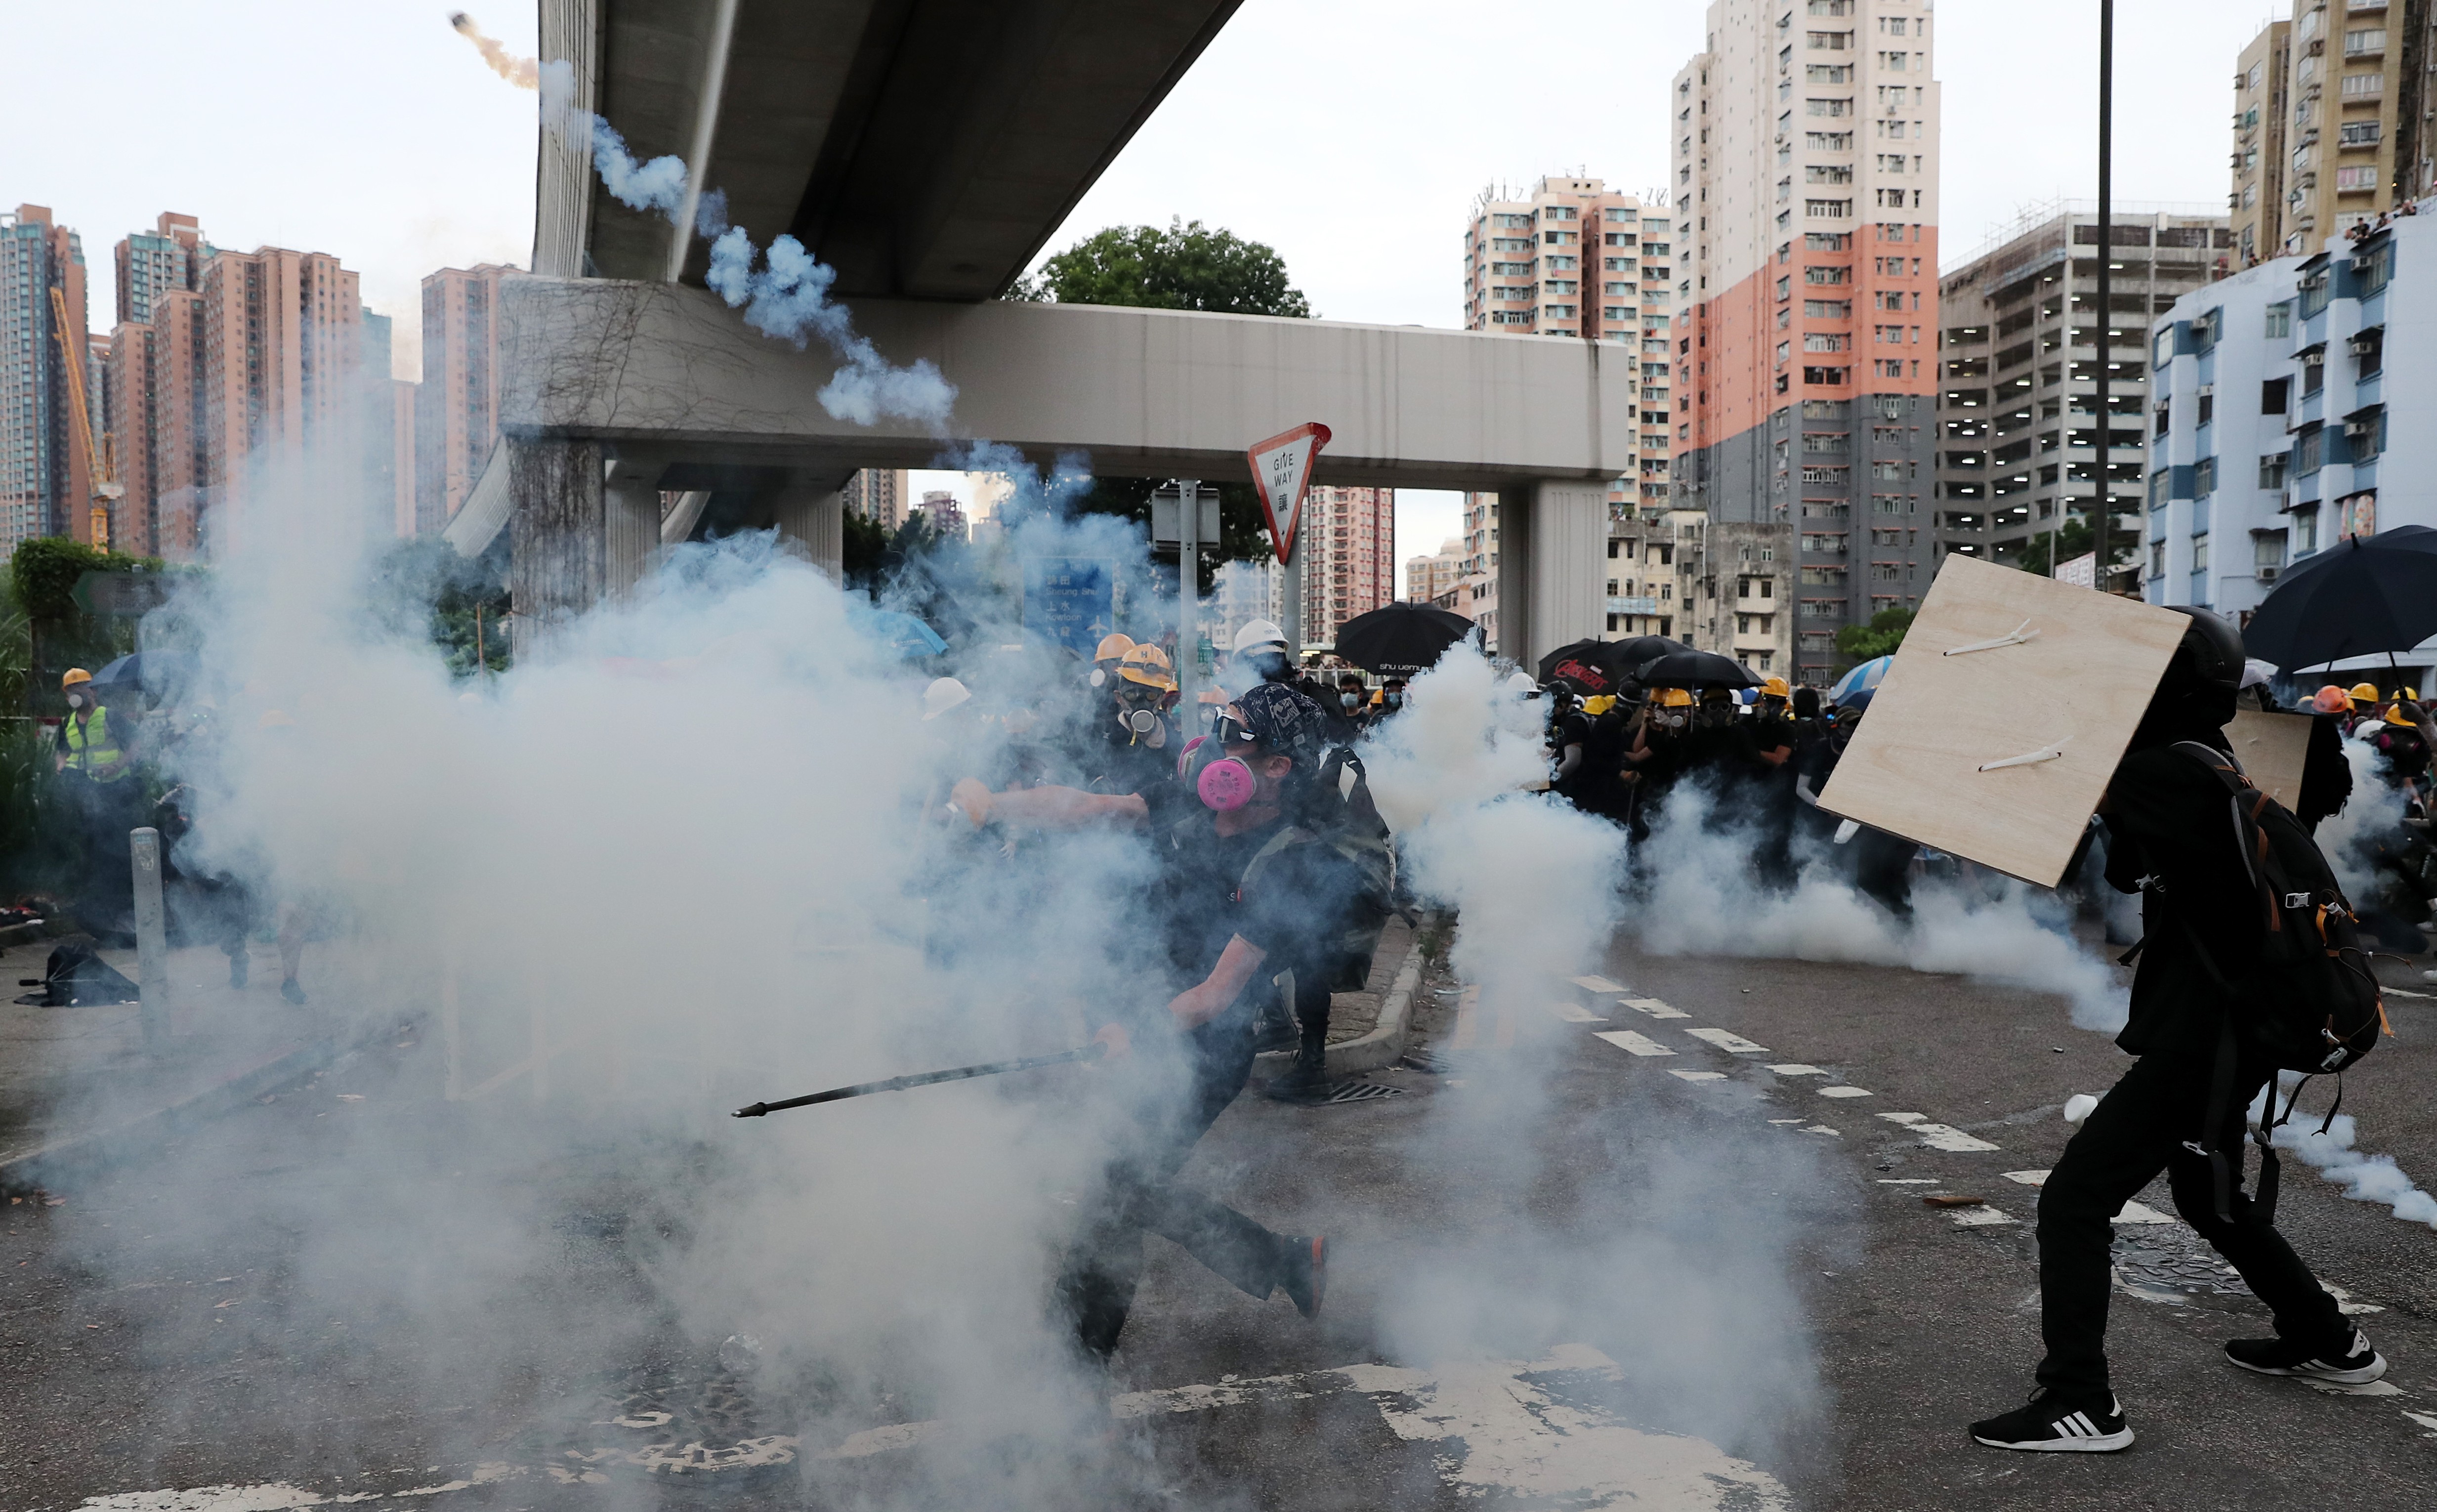 A protester throws a tear-gas canister back at police during clashes in Yuen Long. Photo: Sam Tsang